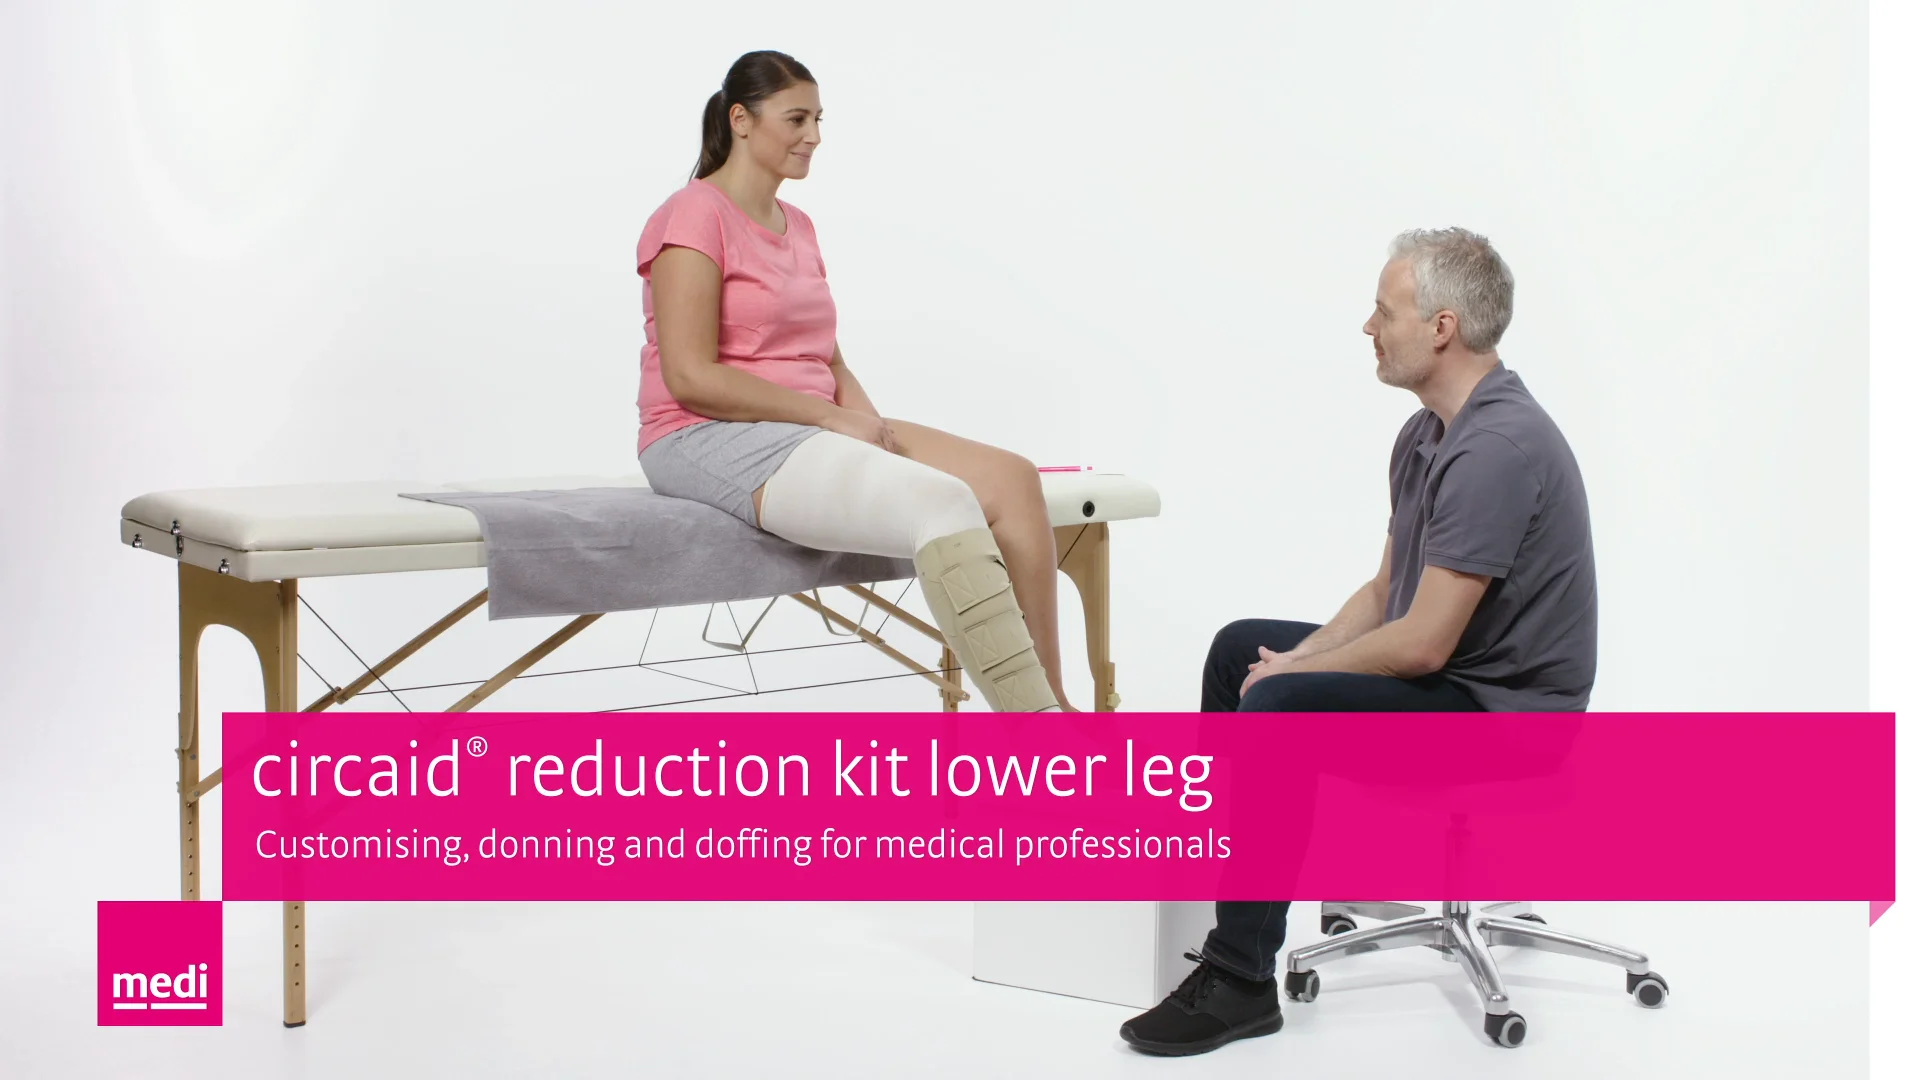 circaid® reduction kit lower leg - Customising, donning and